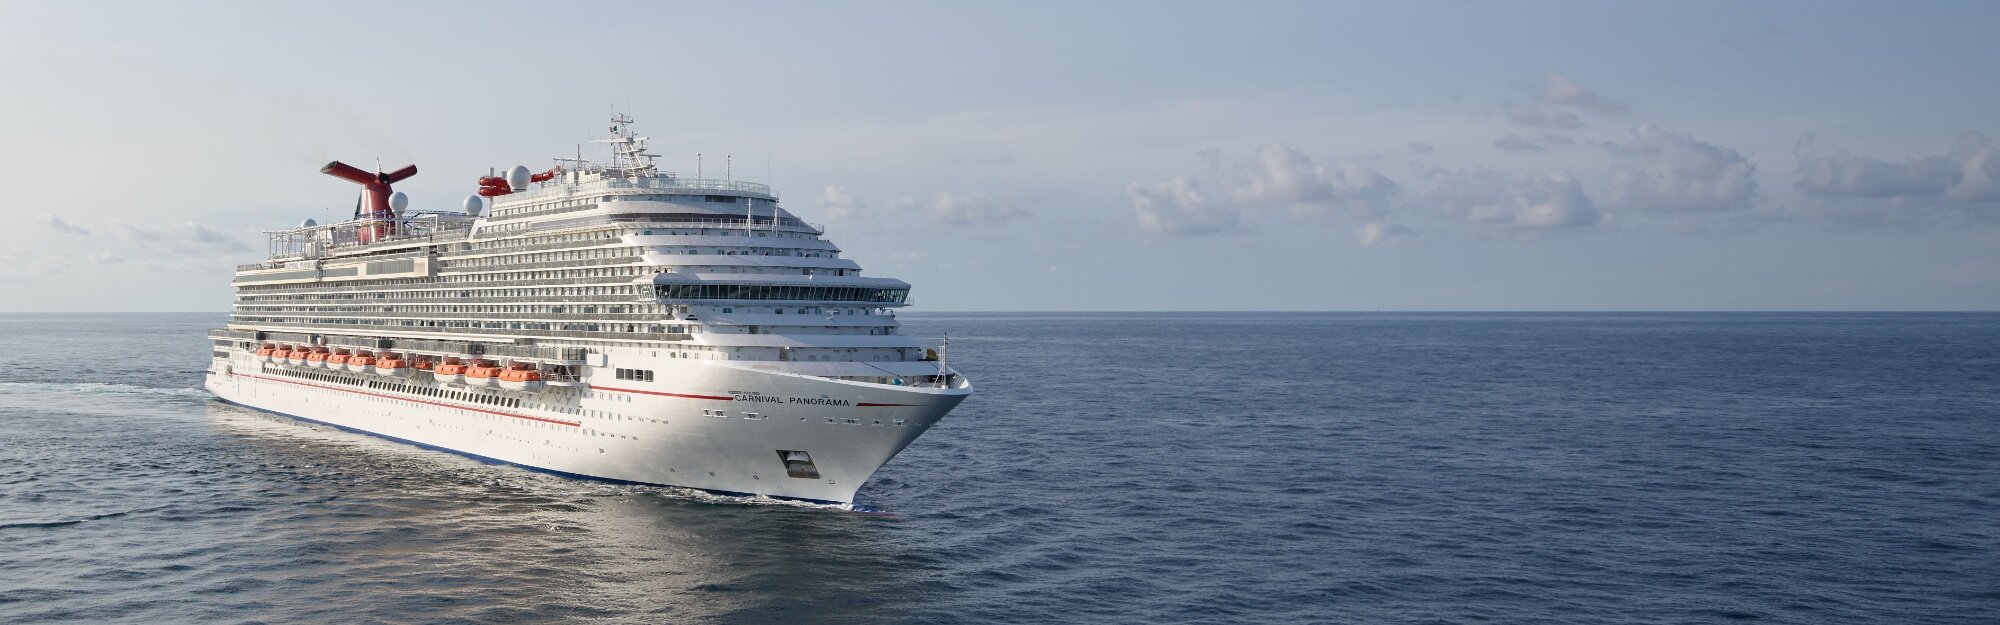 Dufry to sail duty free on Carnival Panorama